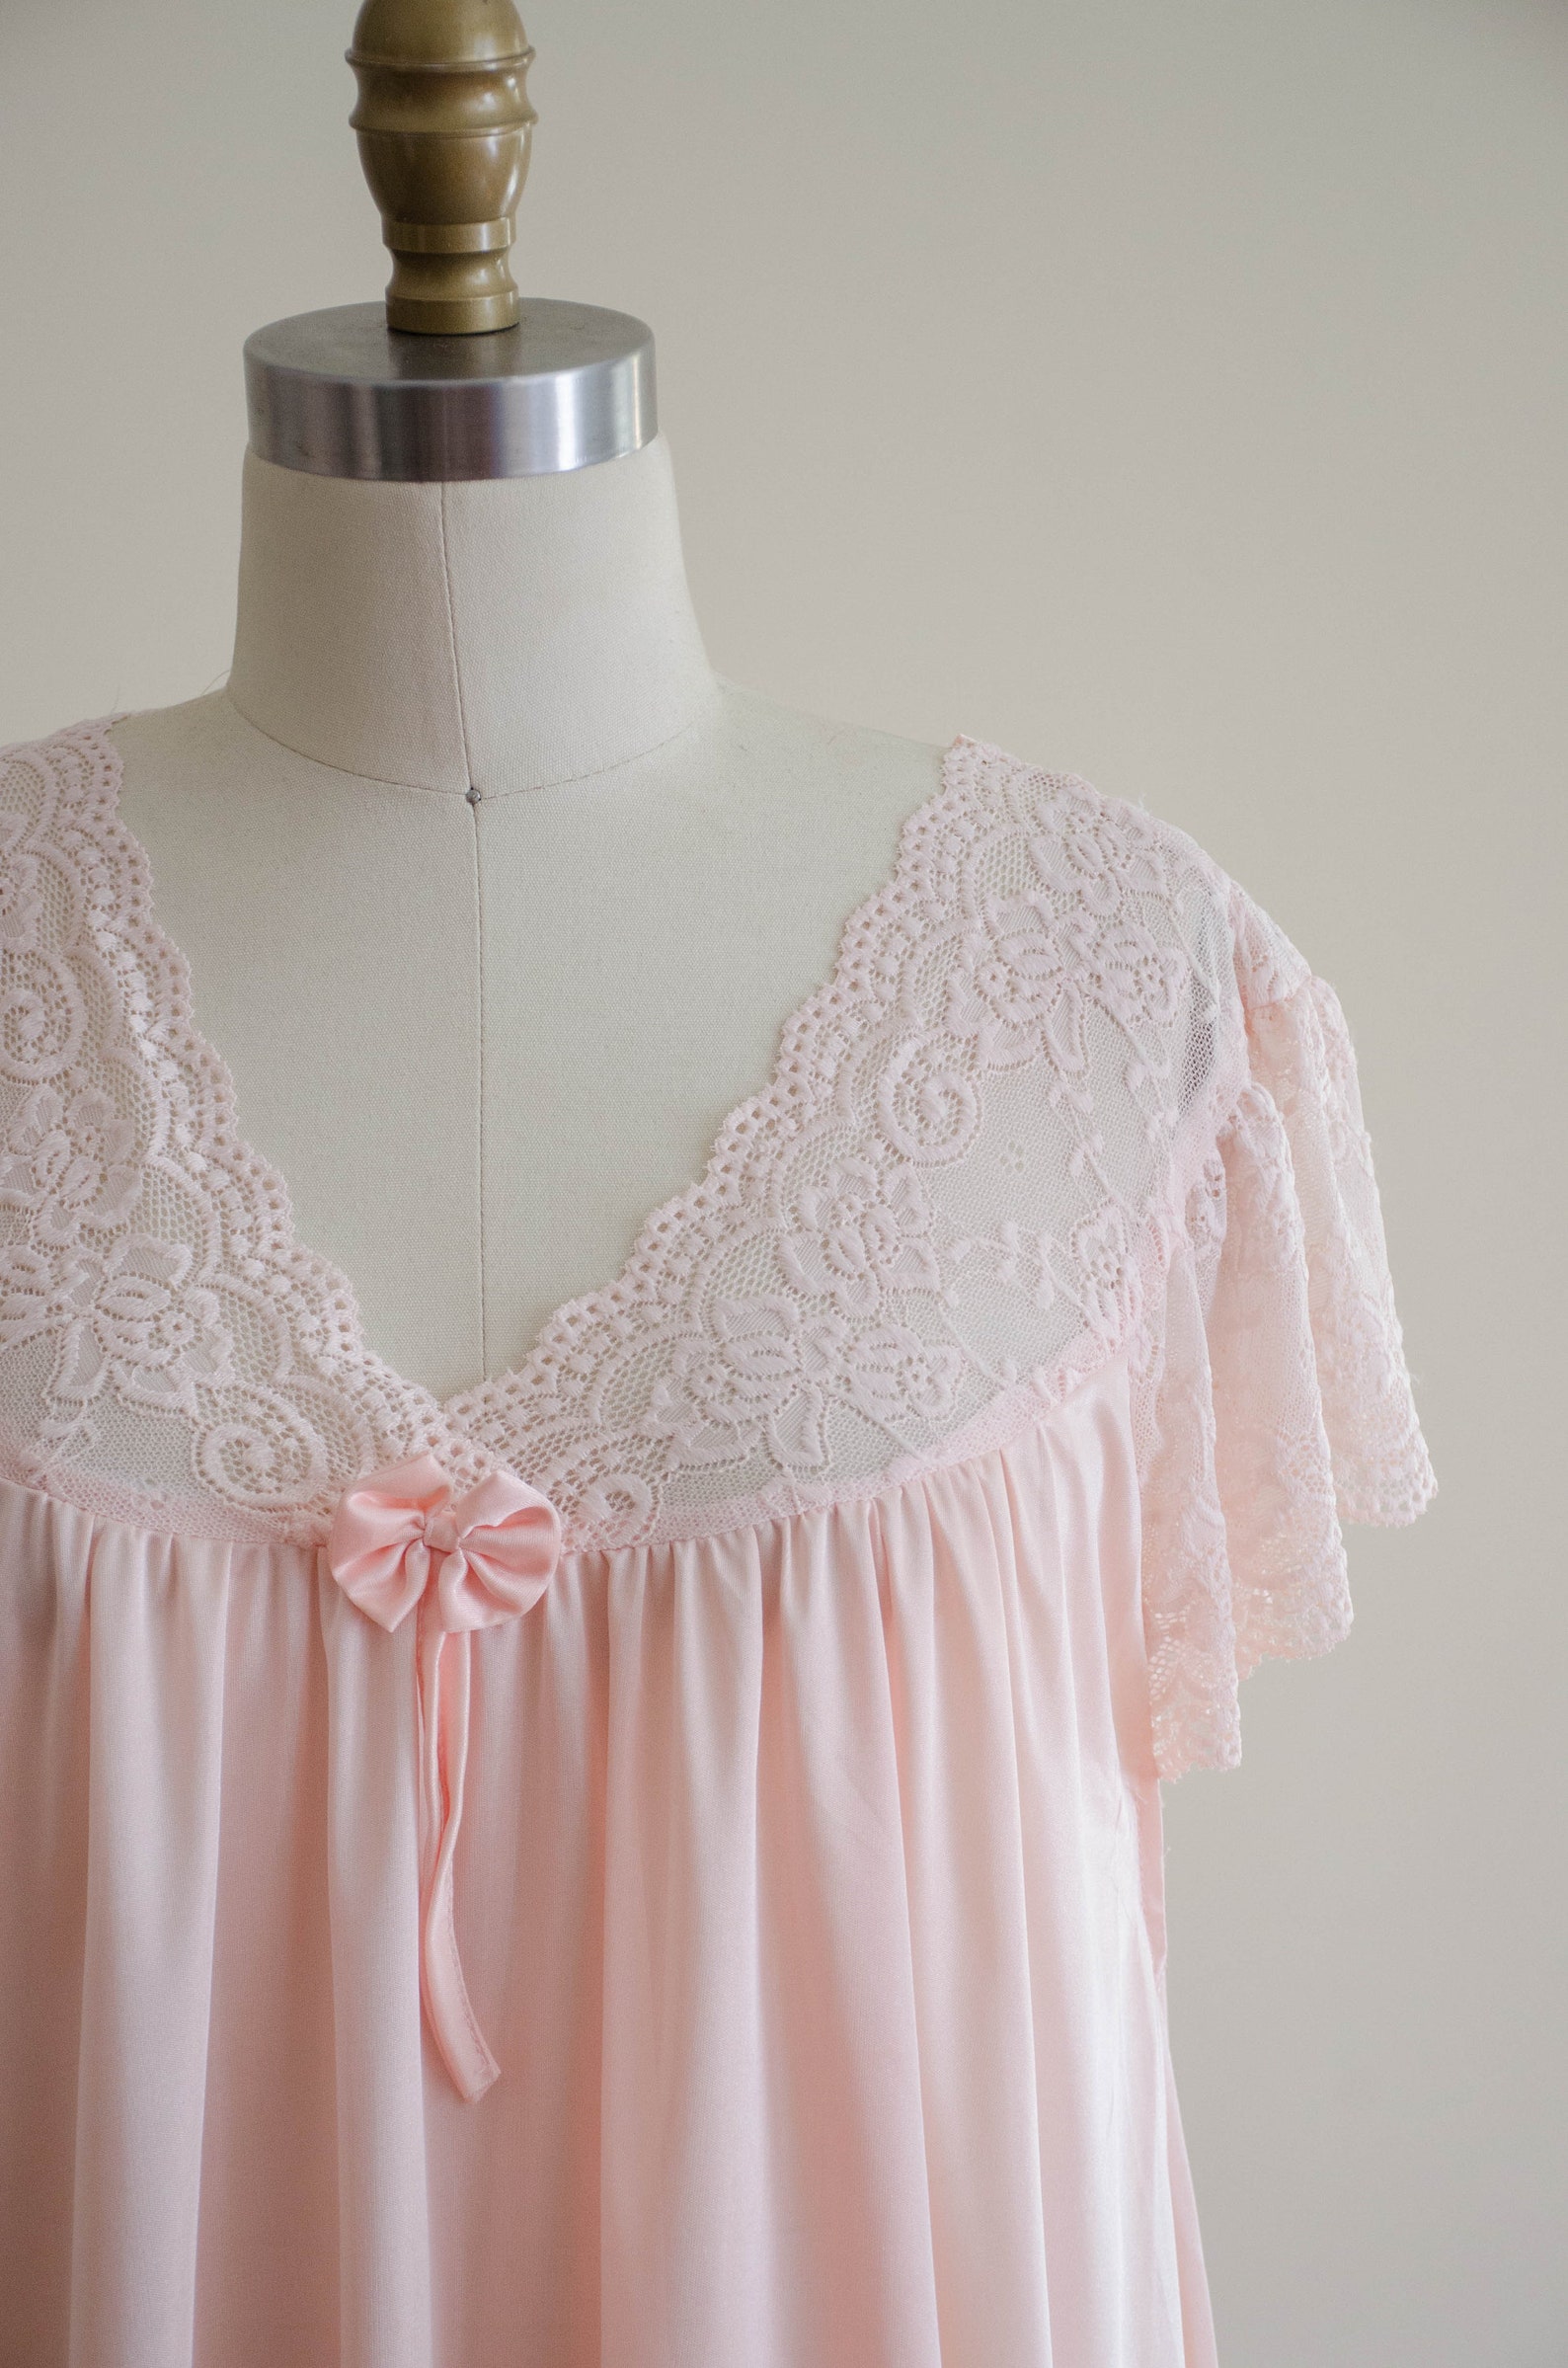 Peach lace nightgown silky peach nightgown vintage | Etsy